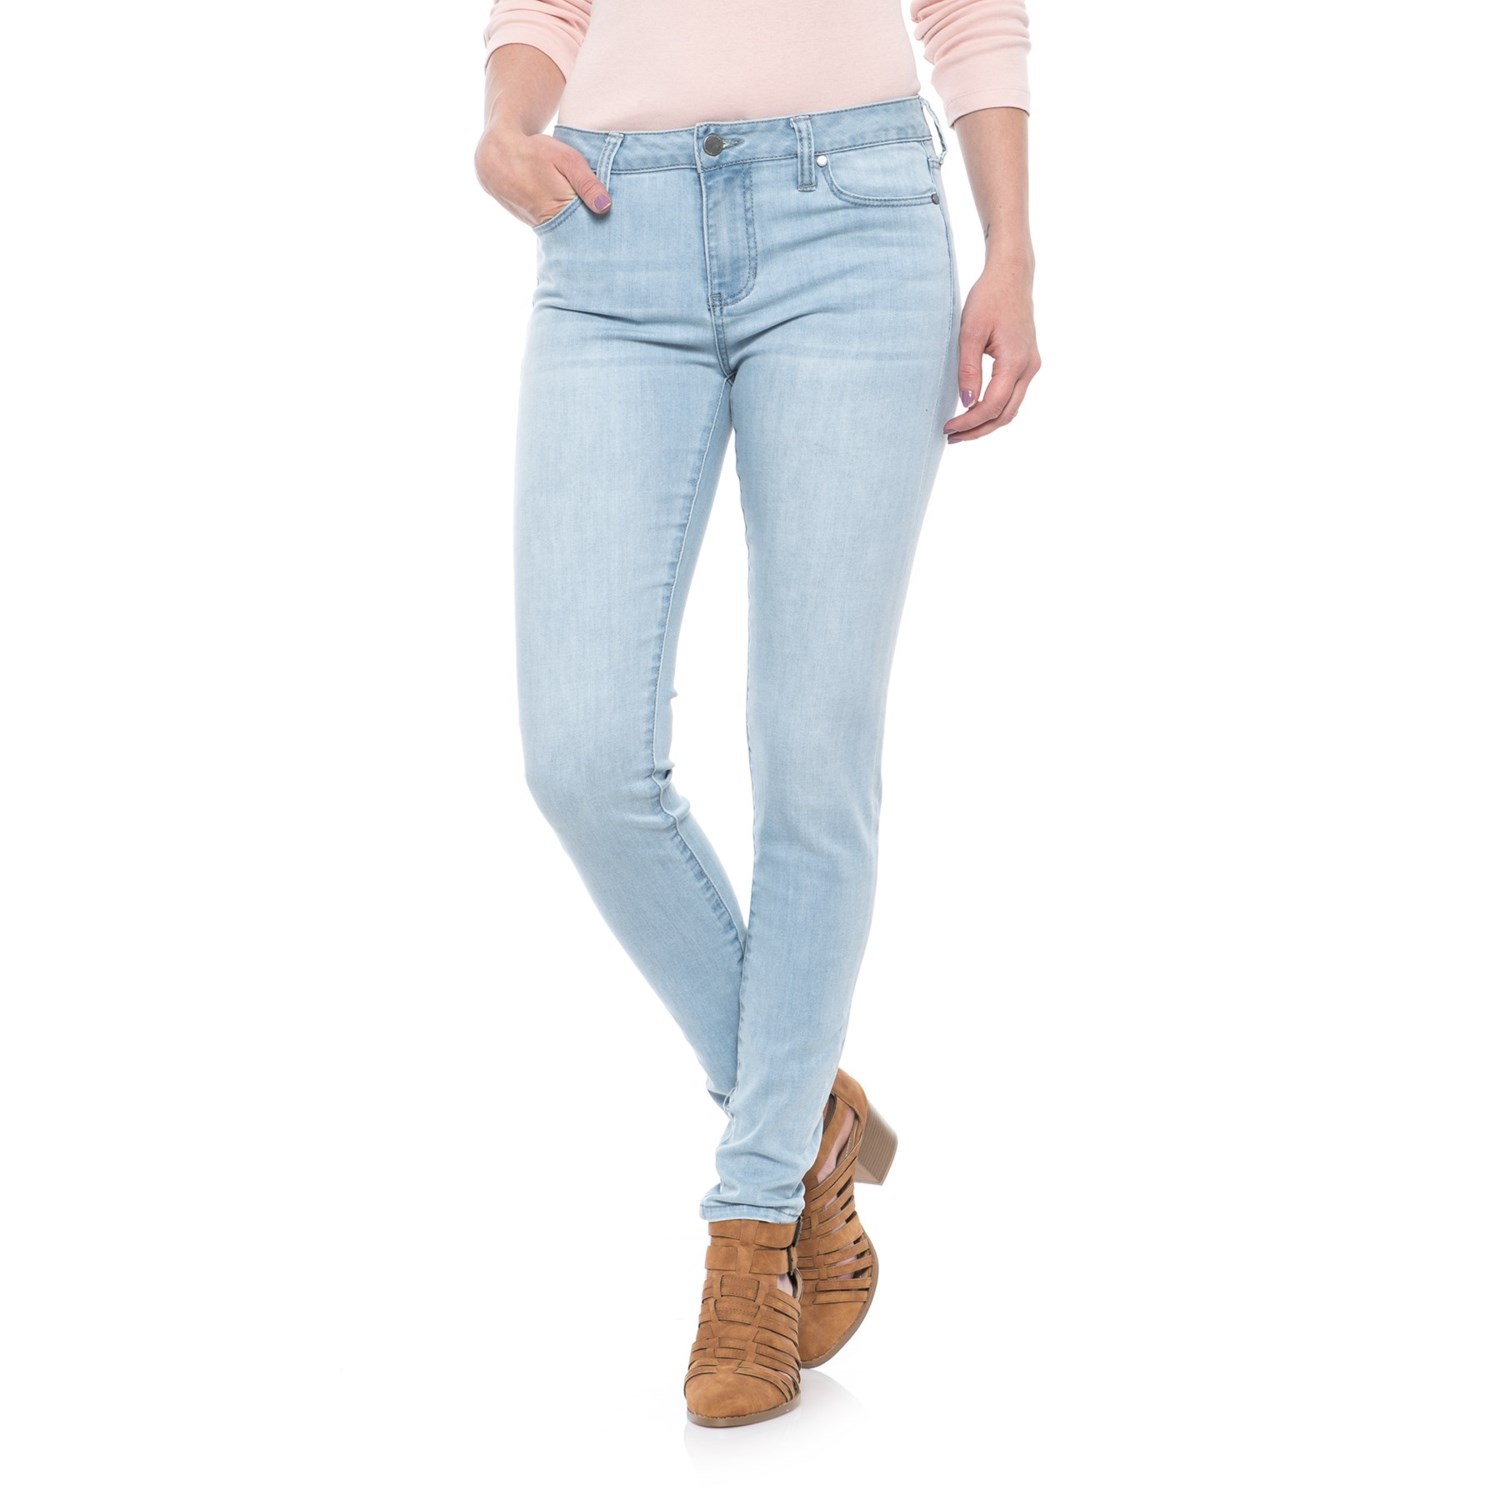 Liverpool Jeans Company 5-Pocket Skinny Jeans (For Women)